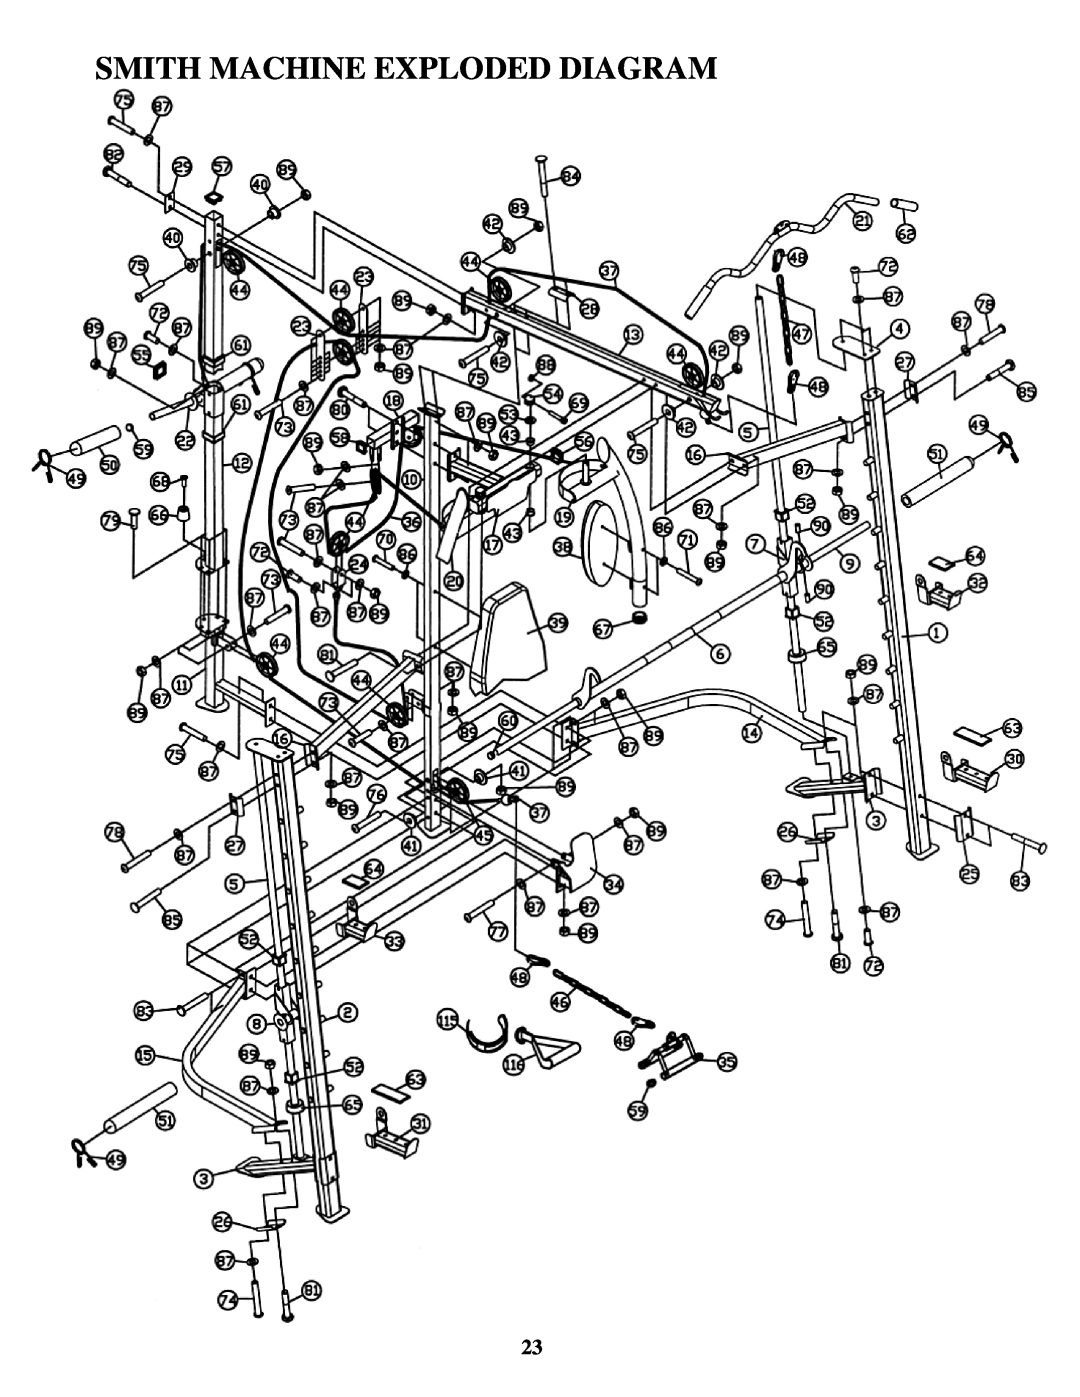 Impex MP-3105 manual Smith Machine Exploded Diagram 